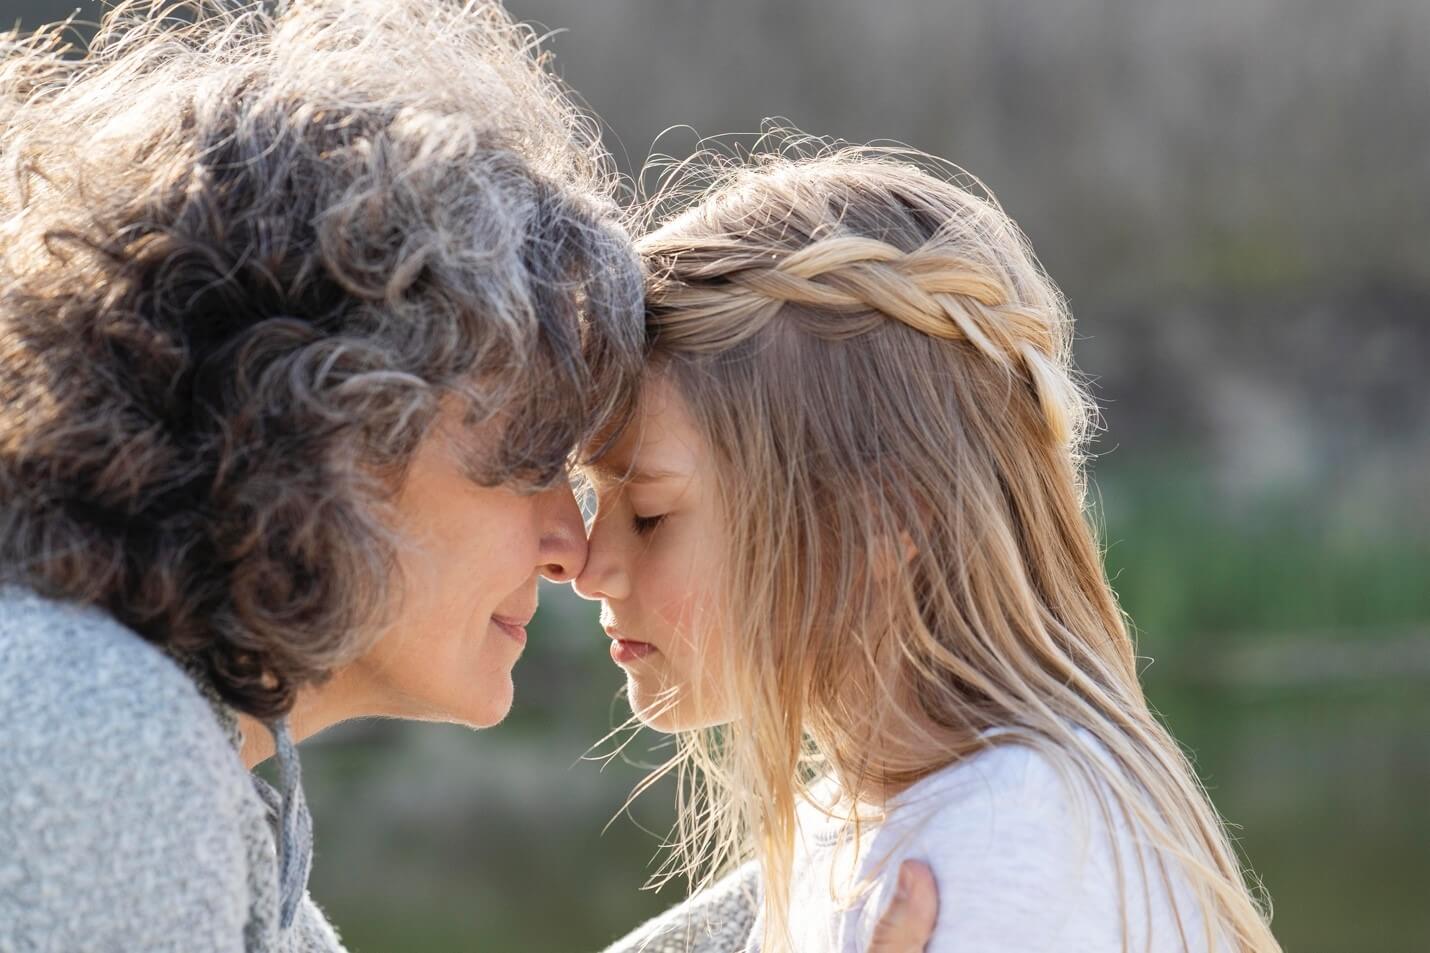 An older woman rests her head on her girl's head. Having a hard time as Anxious Parents in Arlington, MA? Speak with a therapist to see how they can provide parenting support through Therapy for Teens in Arlington, MA